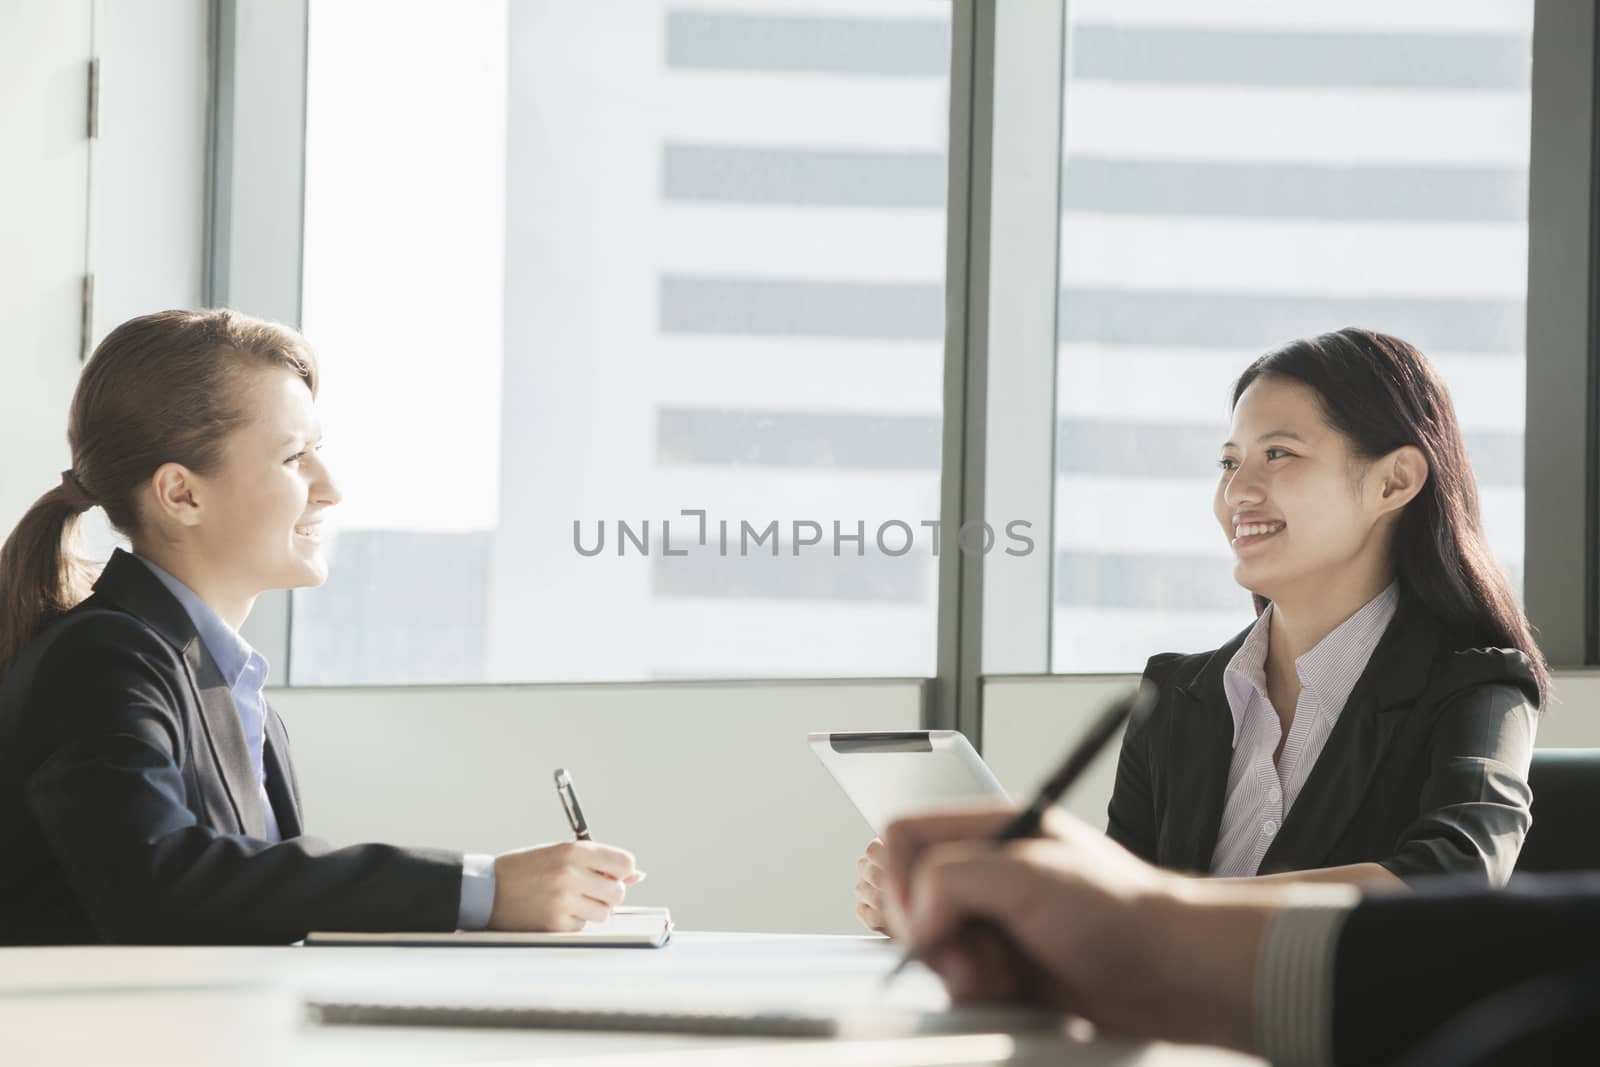 Two businesswomen smiling and looking at each other during a business meeting